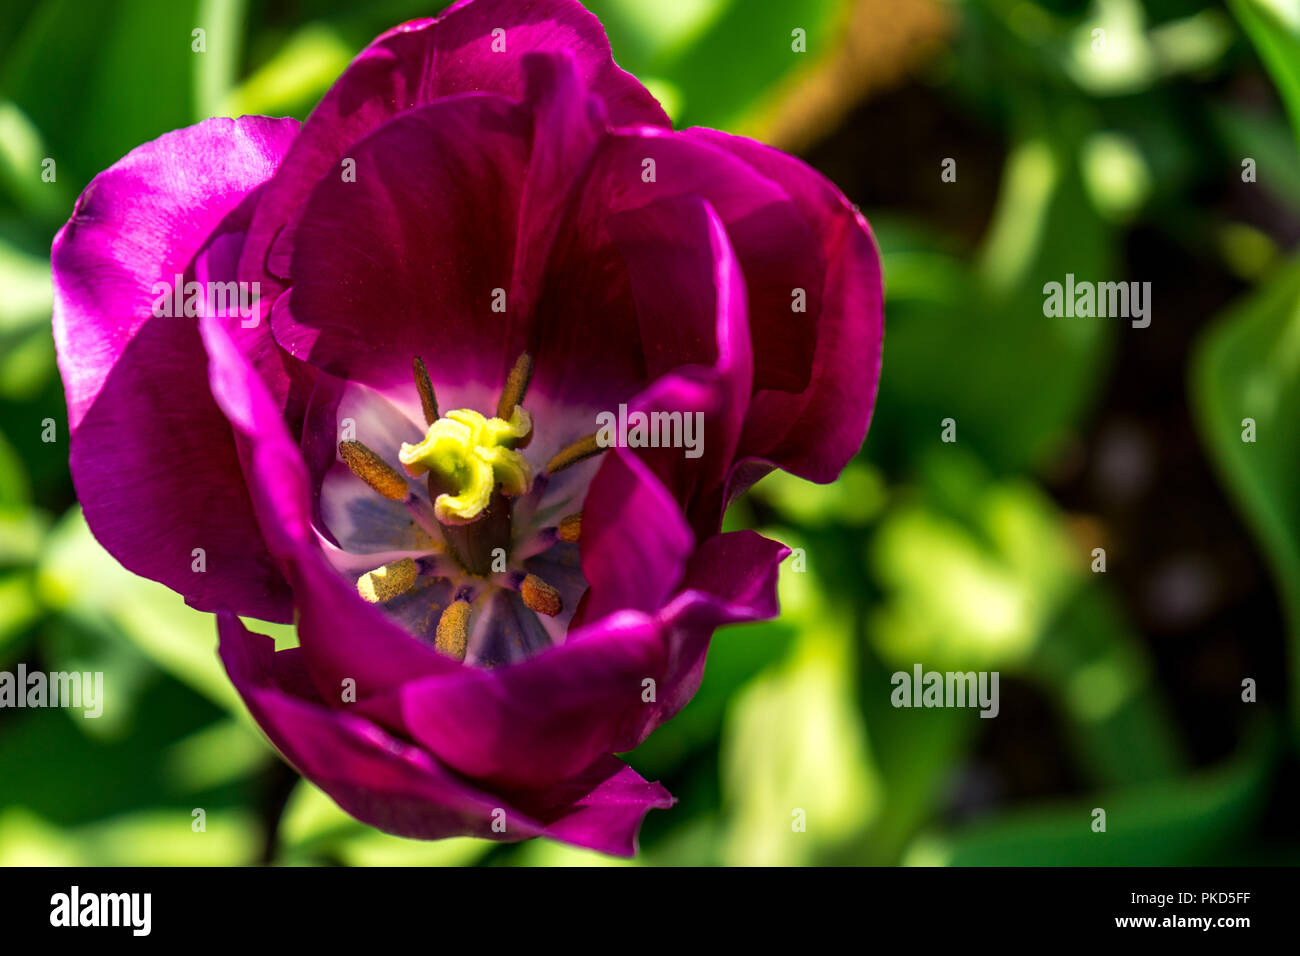 Netherlands,Lisse,Europe, CLOSE-UP OF PURPLE FLOWERING PLANT Stock Photo